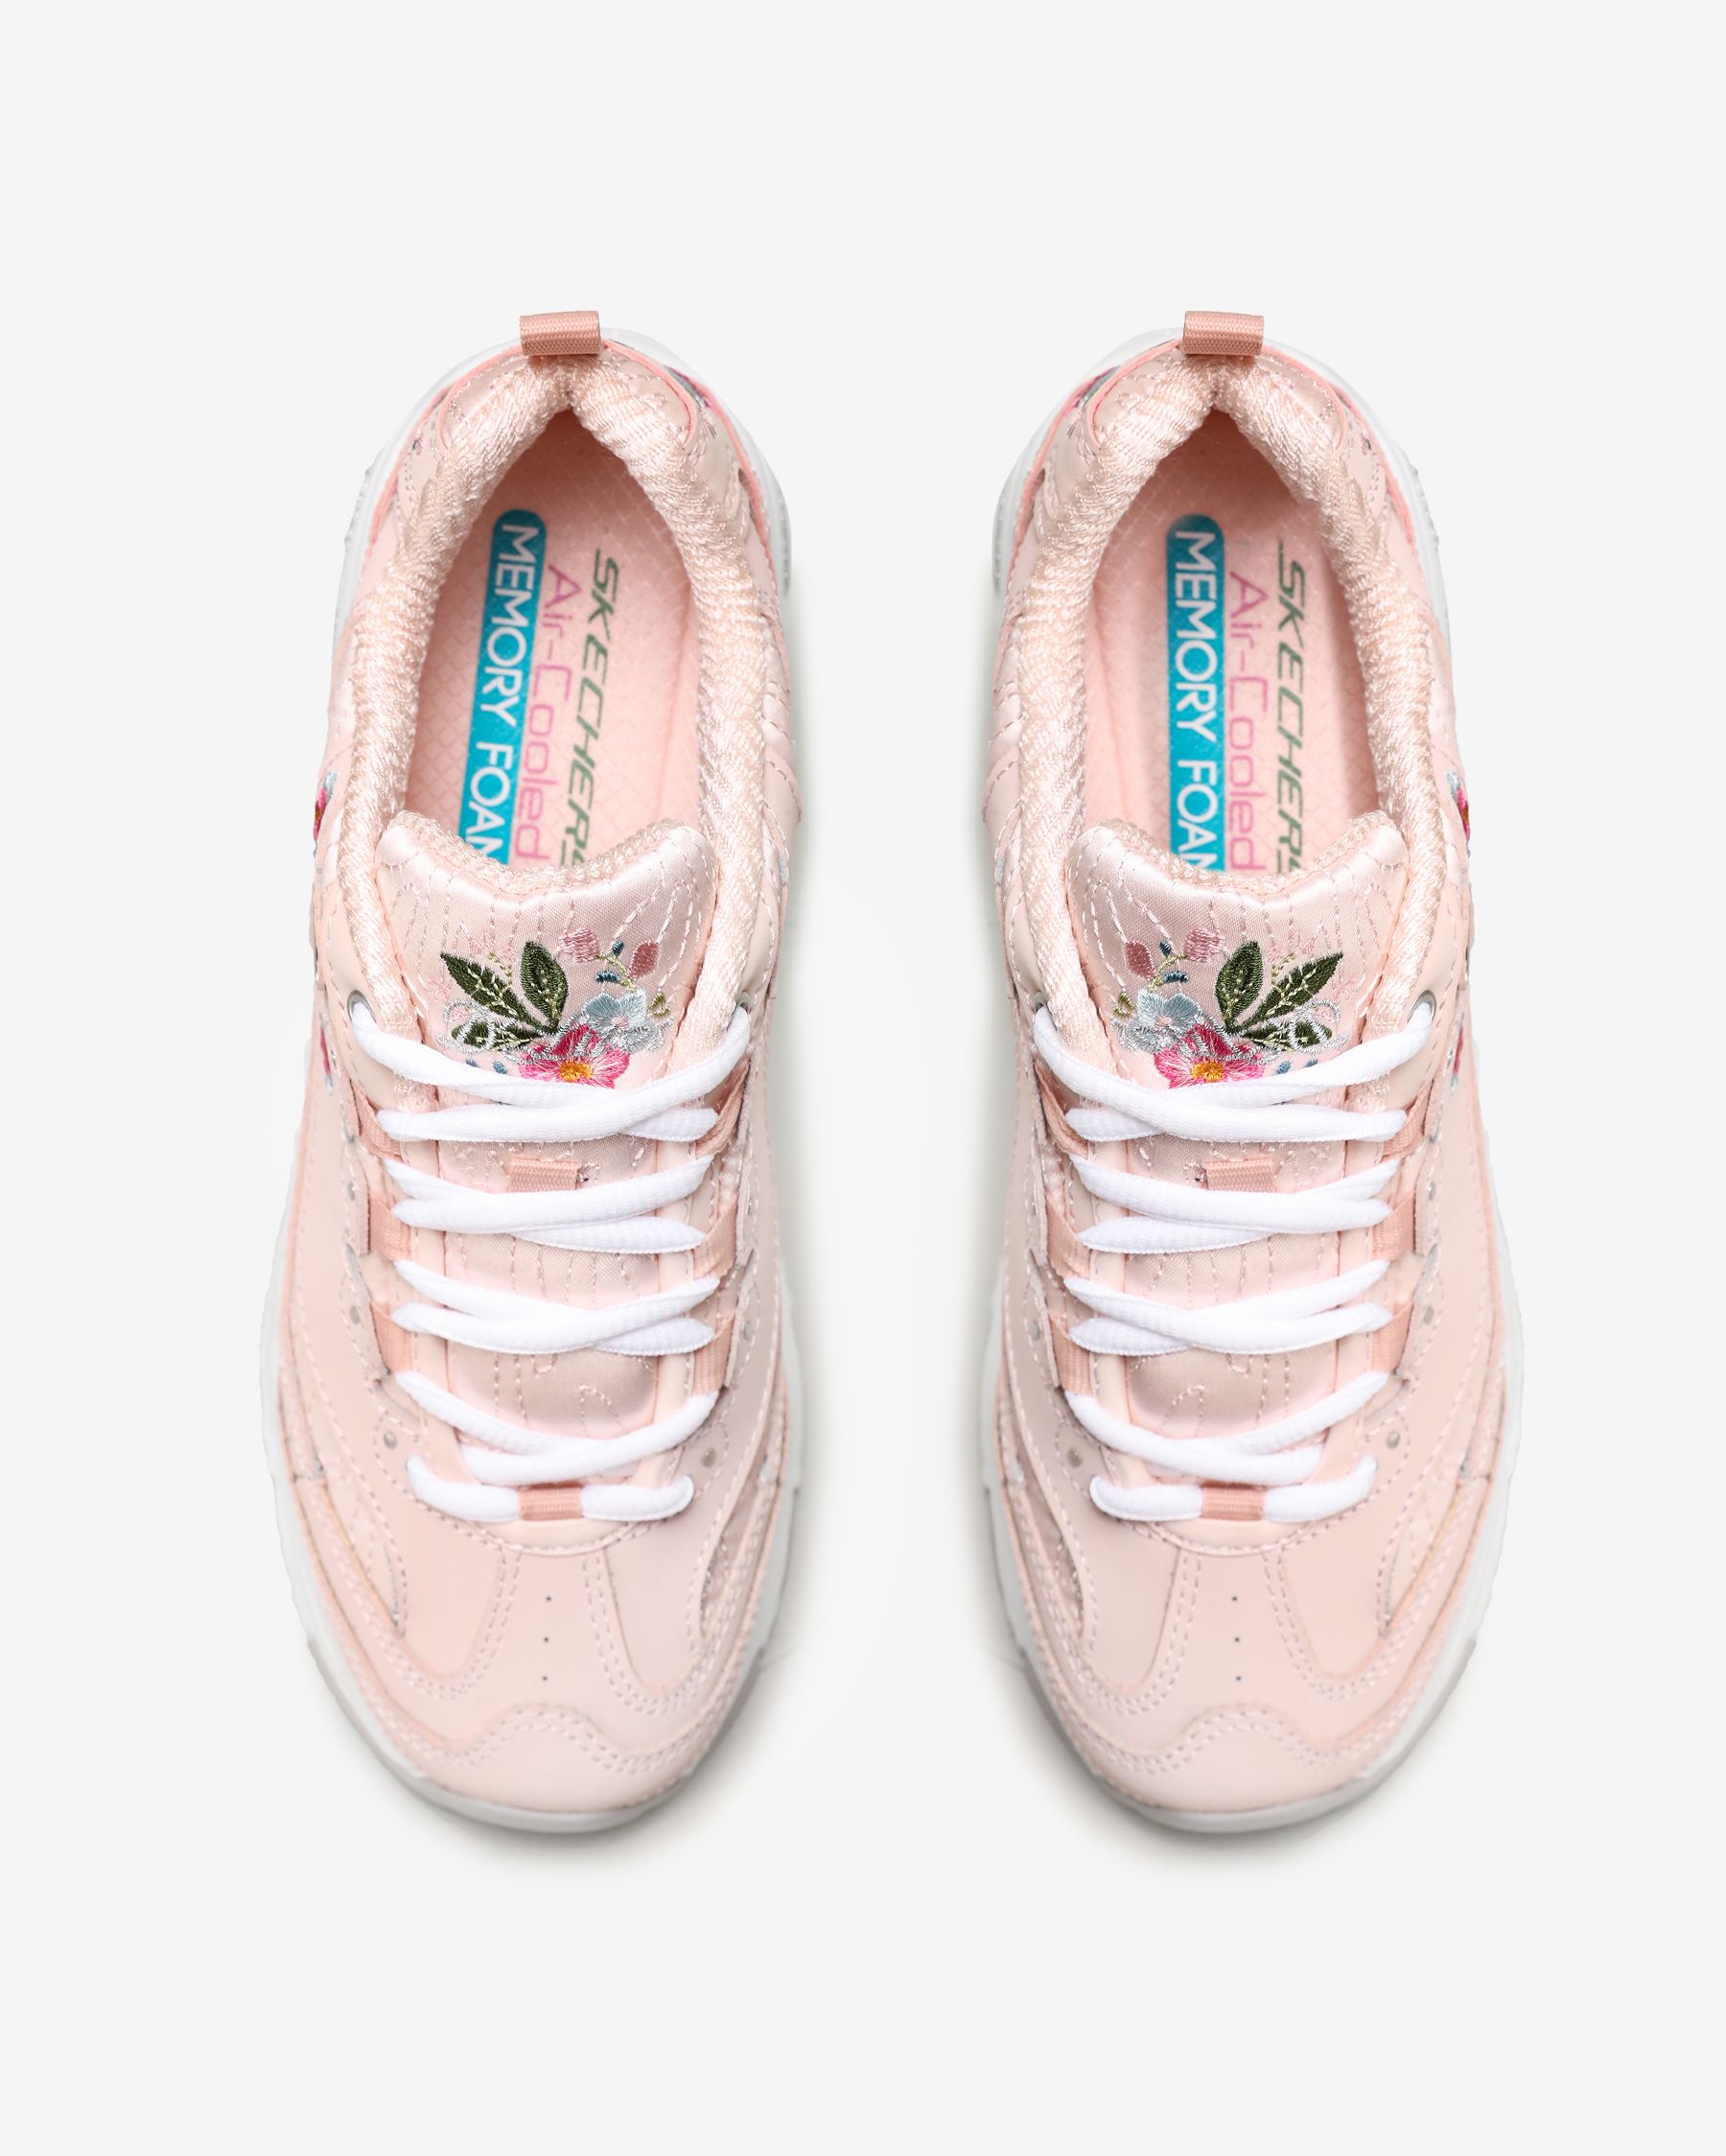 D'lites-Bright Blossoms Pembe Sneakers 11977